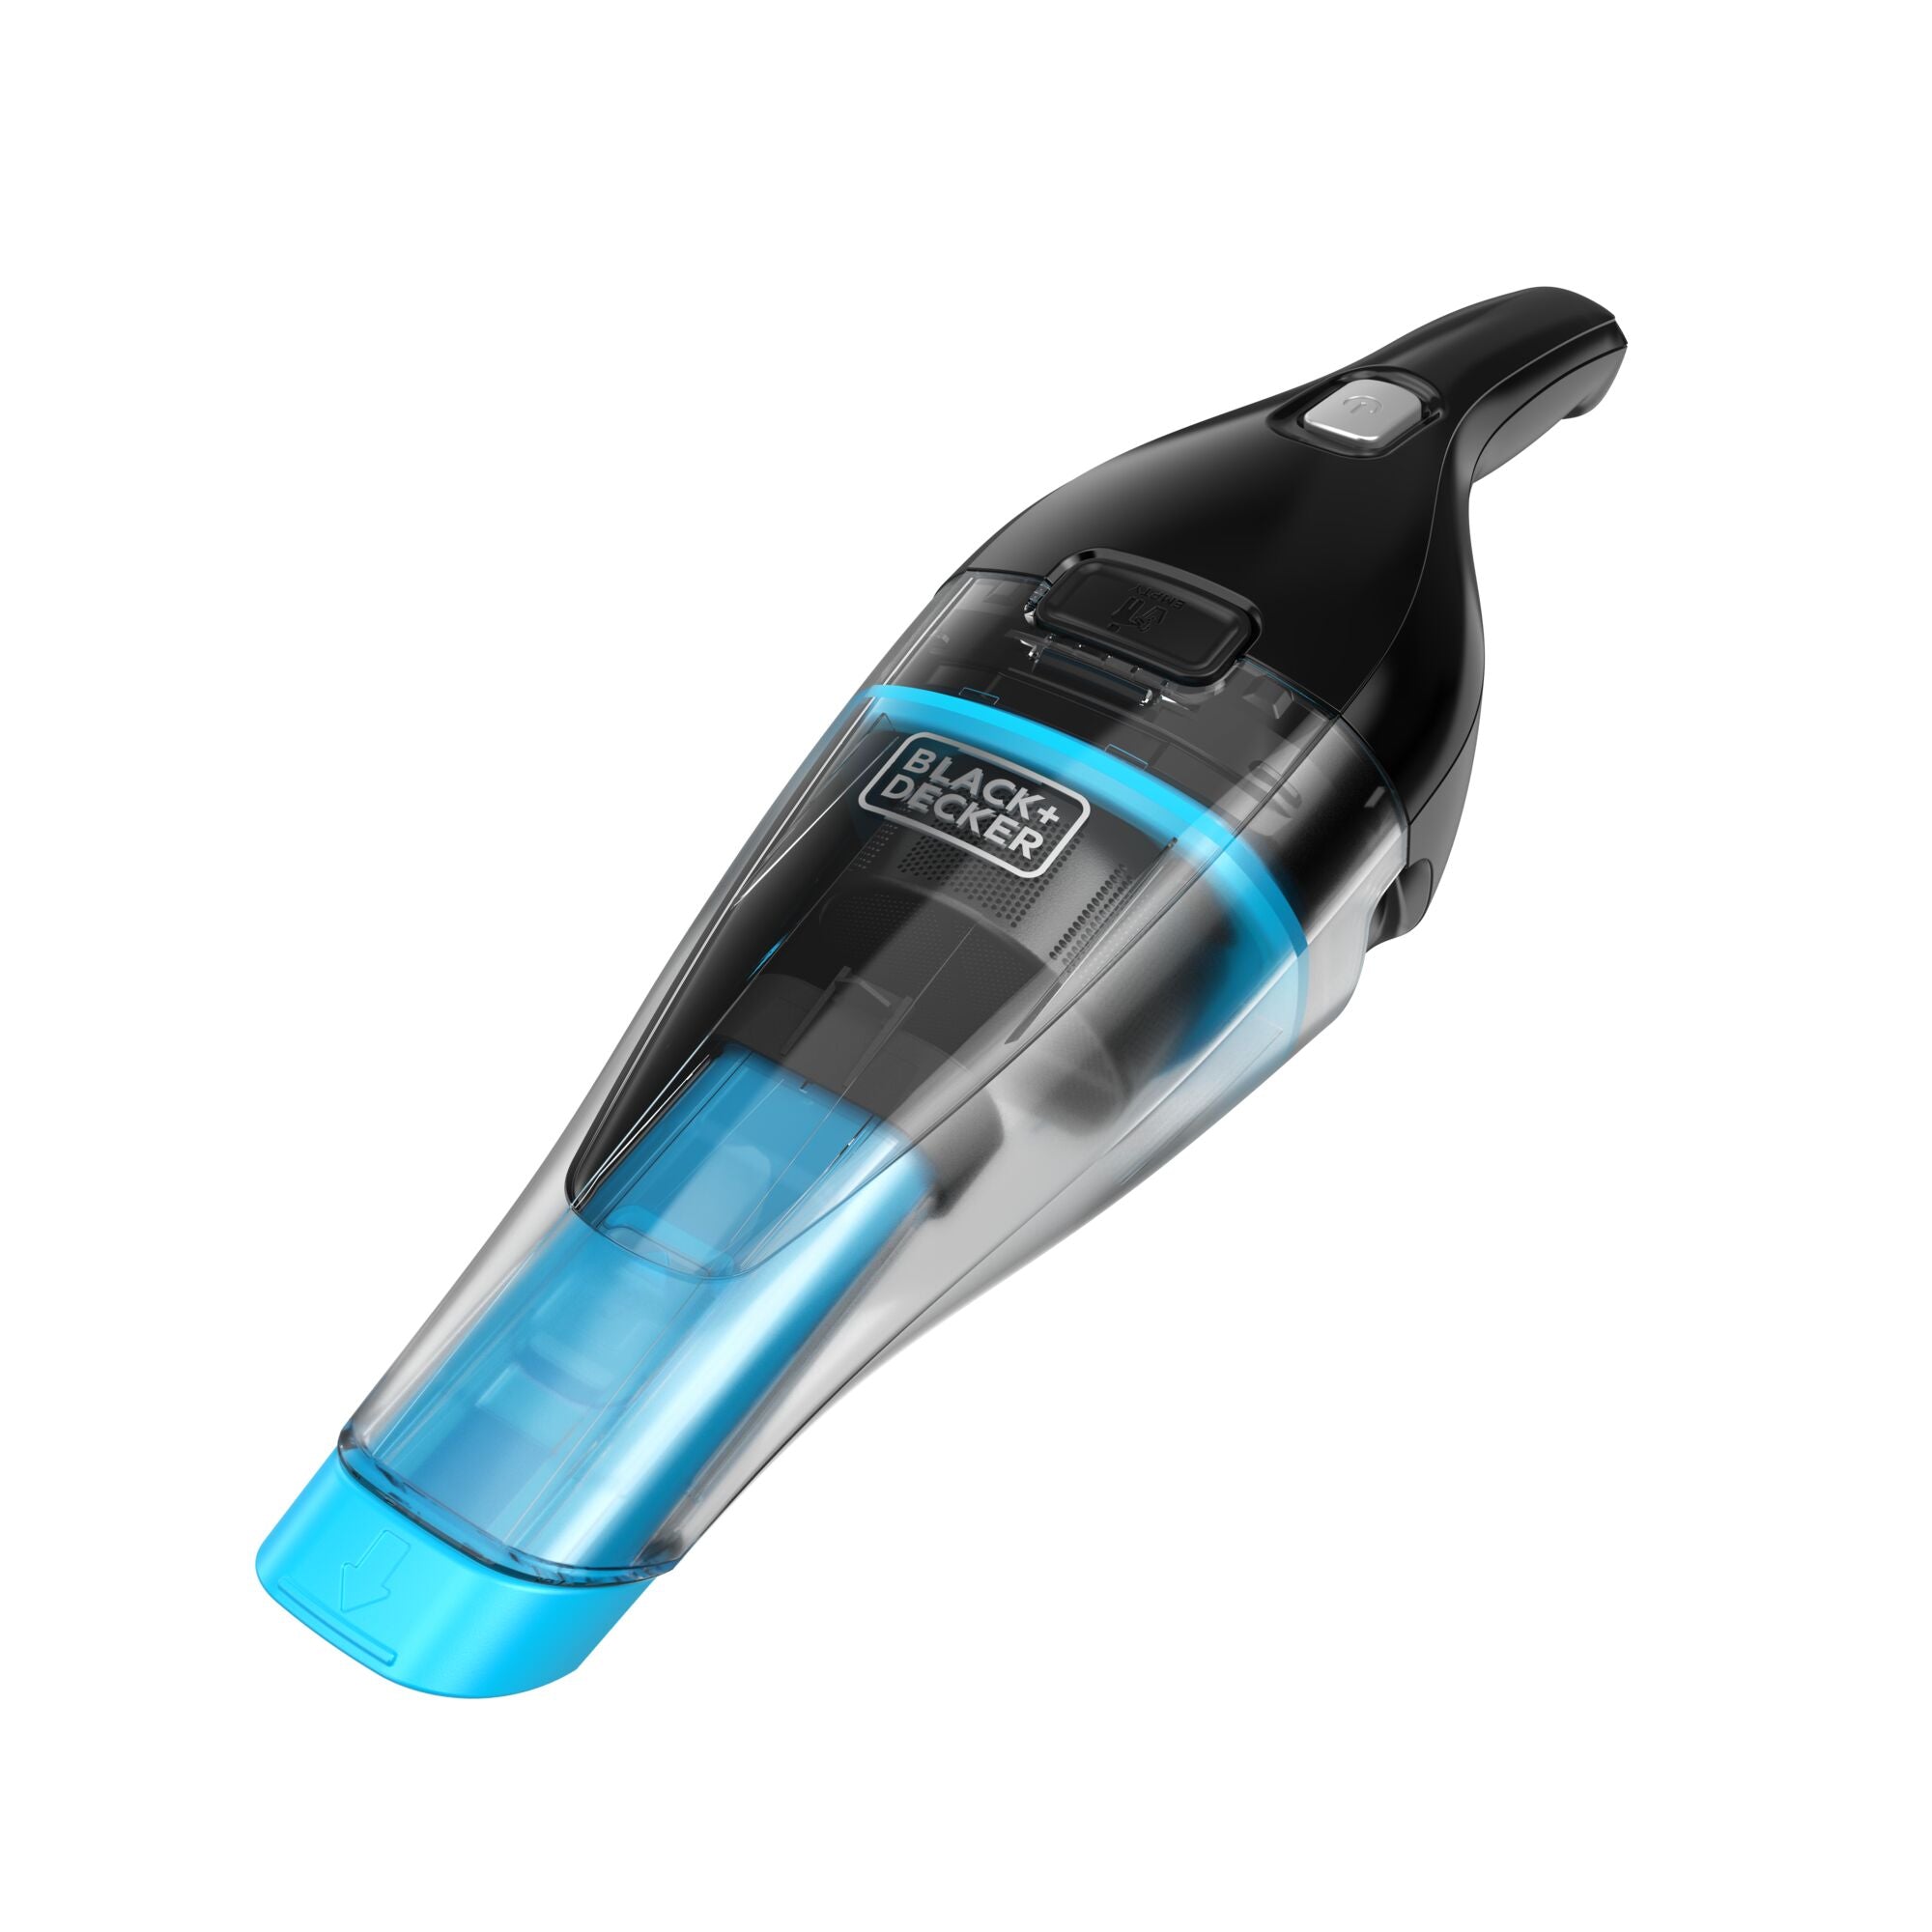 BLACK+DECKER dustbuster® Classic Cordless Hand Vacuum dust bowl being remove